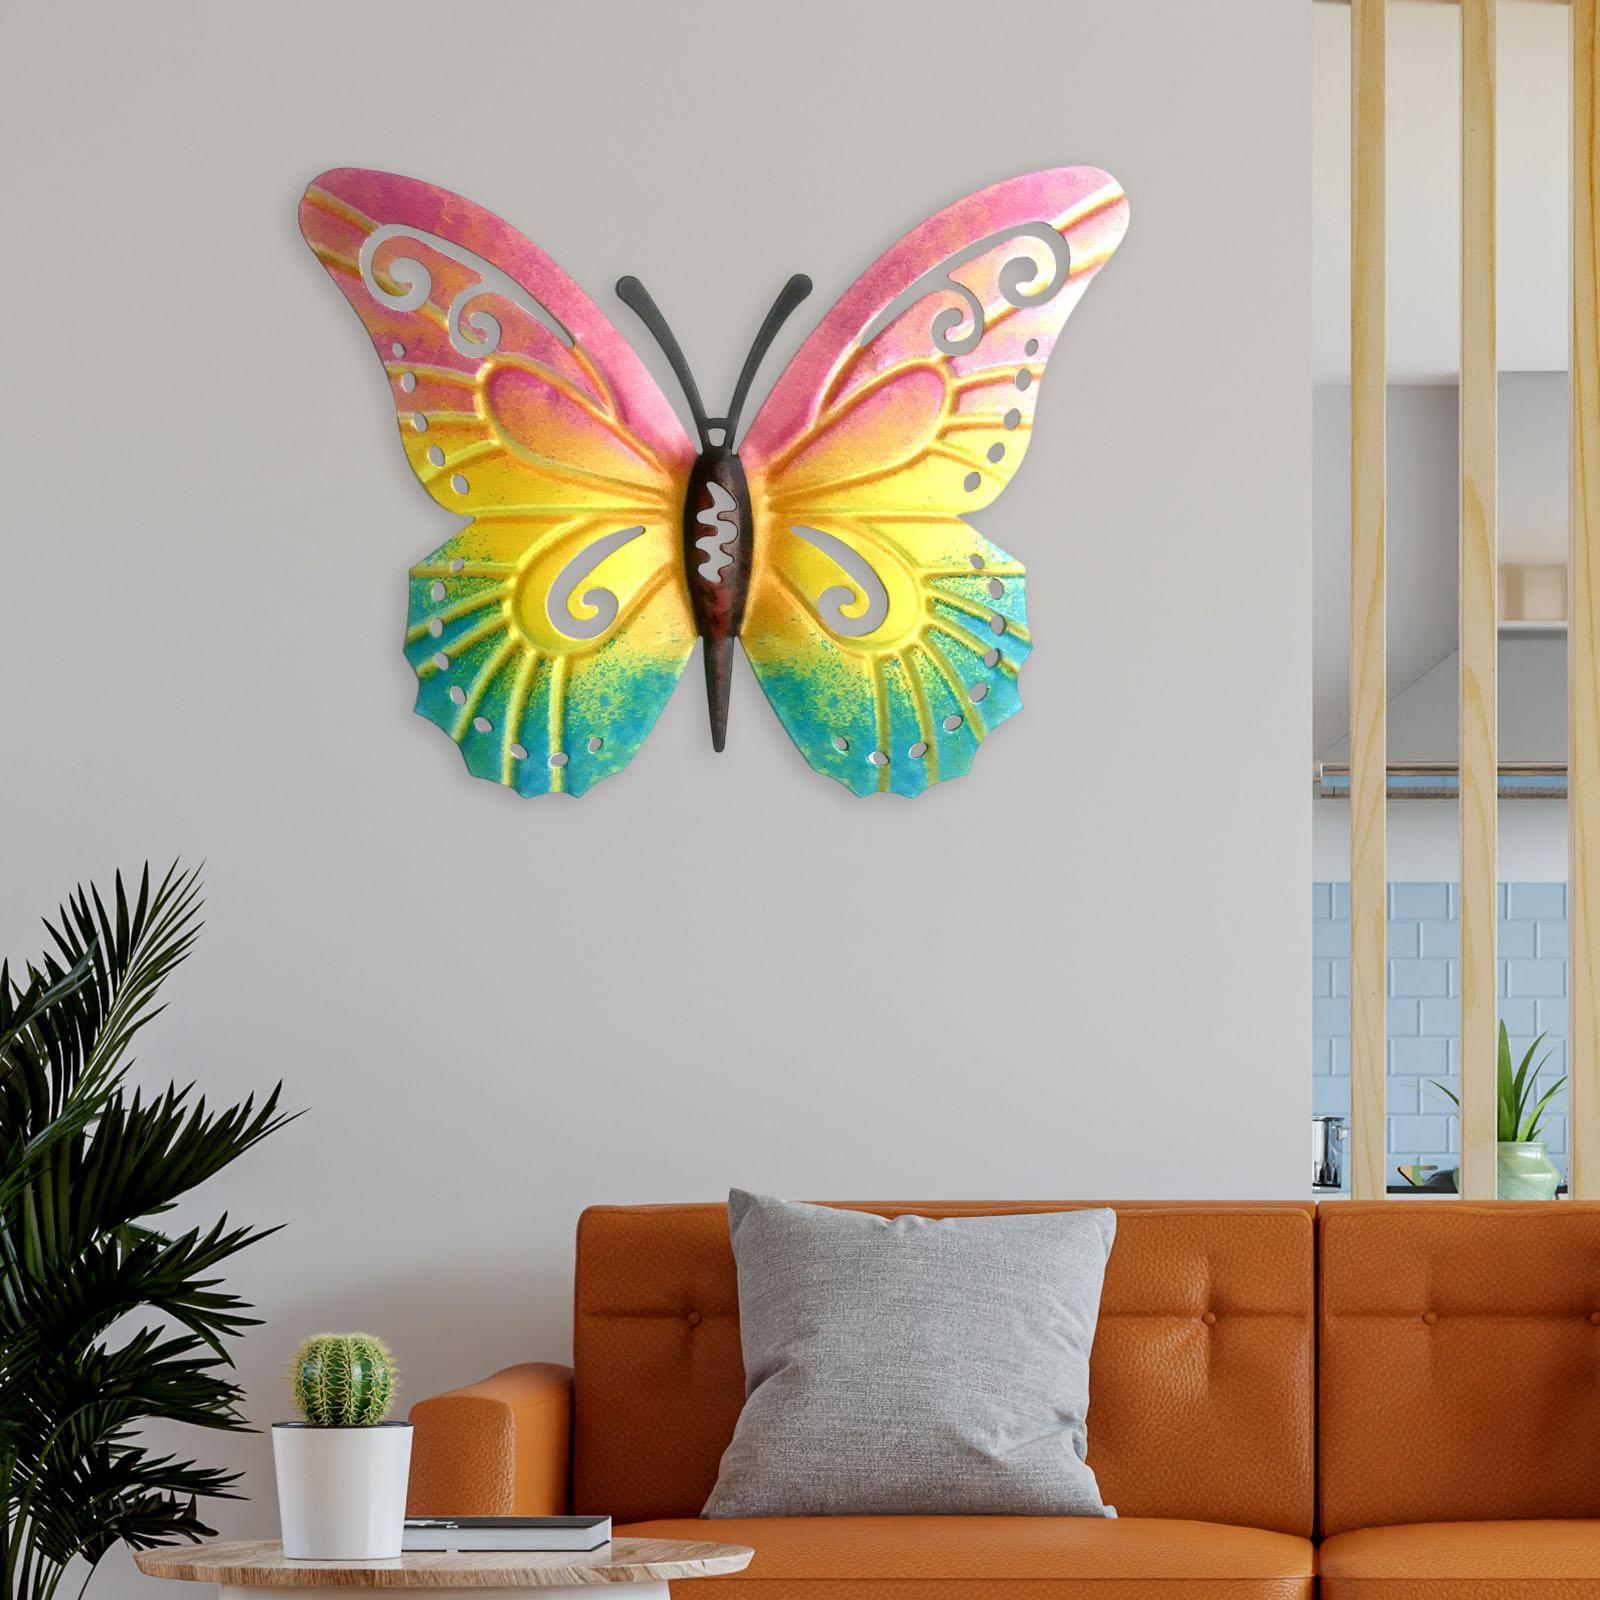 Butterfly Wall Decors Wall Sculptures Figurines for Garden Home Decors pink yellow blue